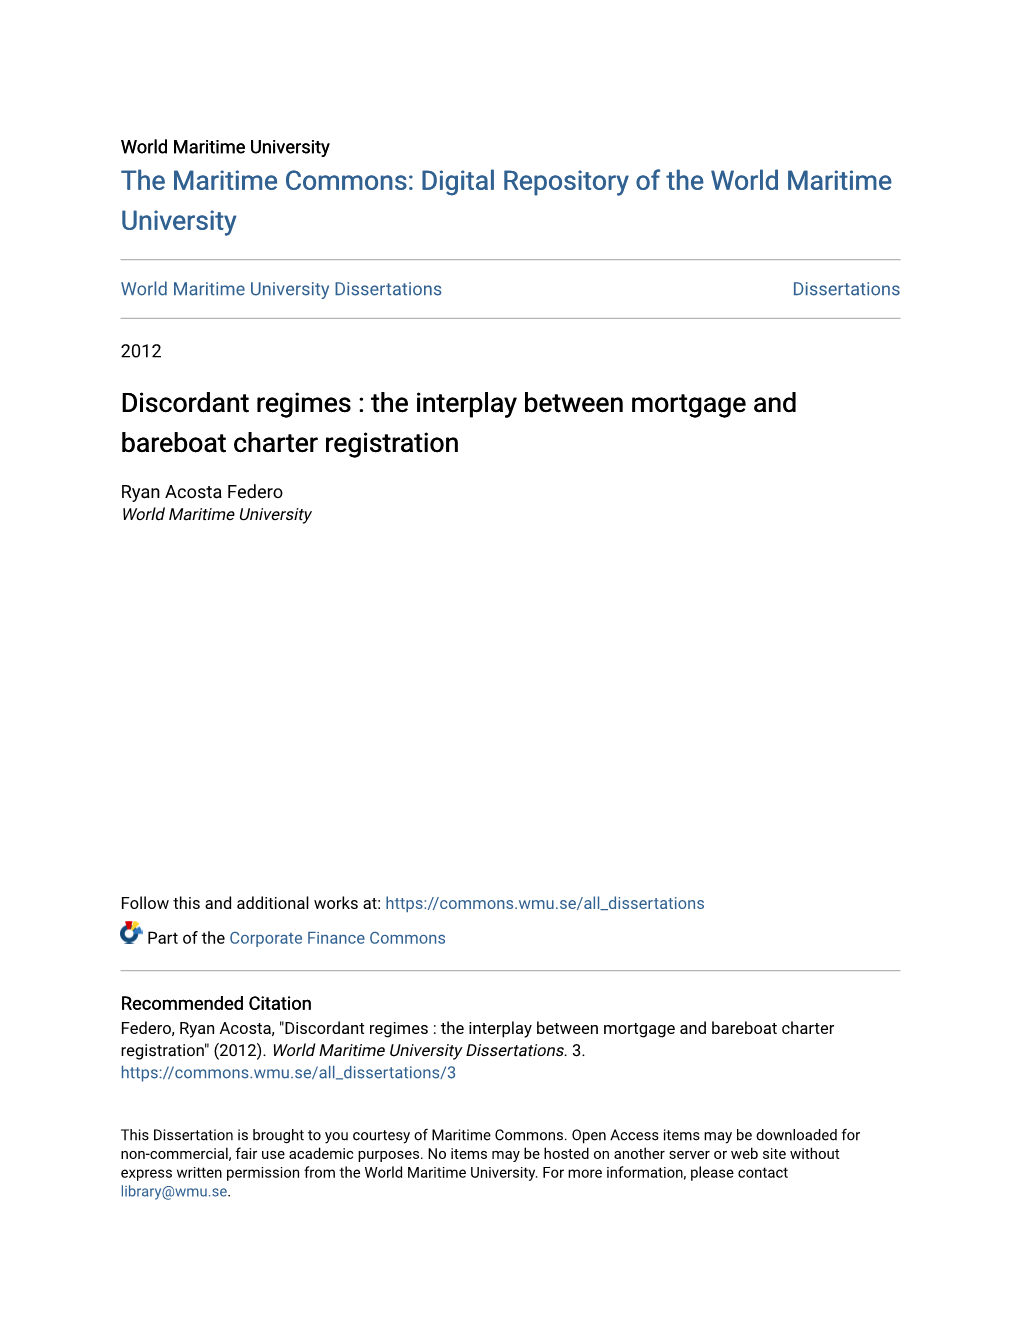 The Interplay Between Mortgage and Bareboat Charter Registration